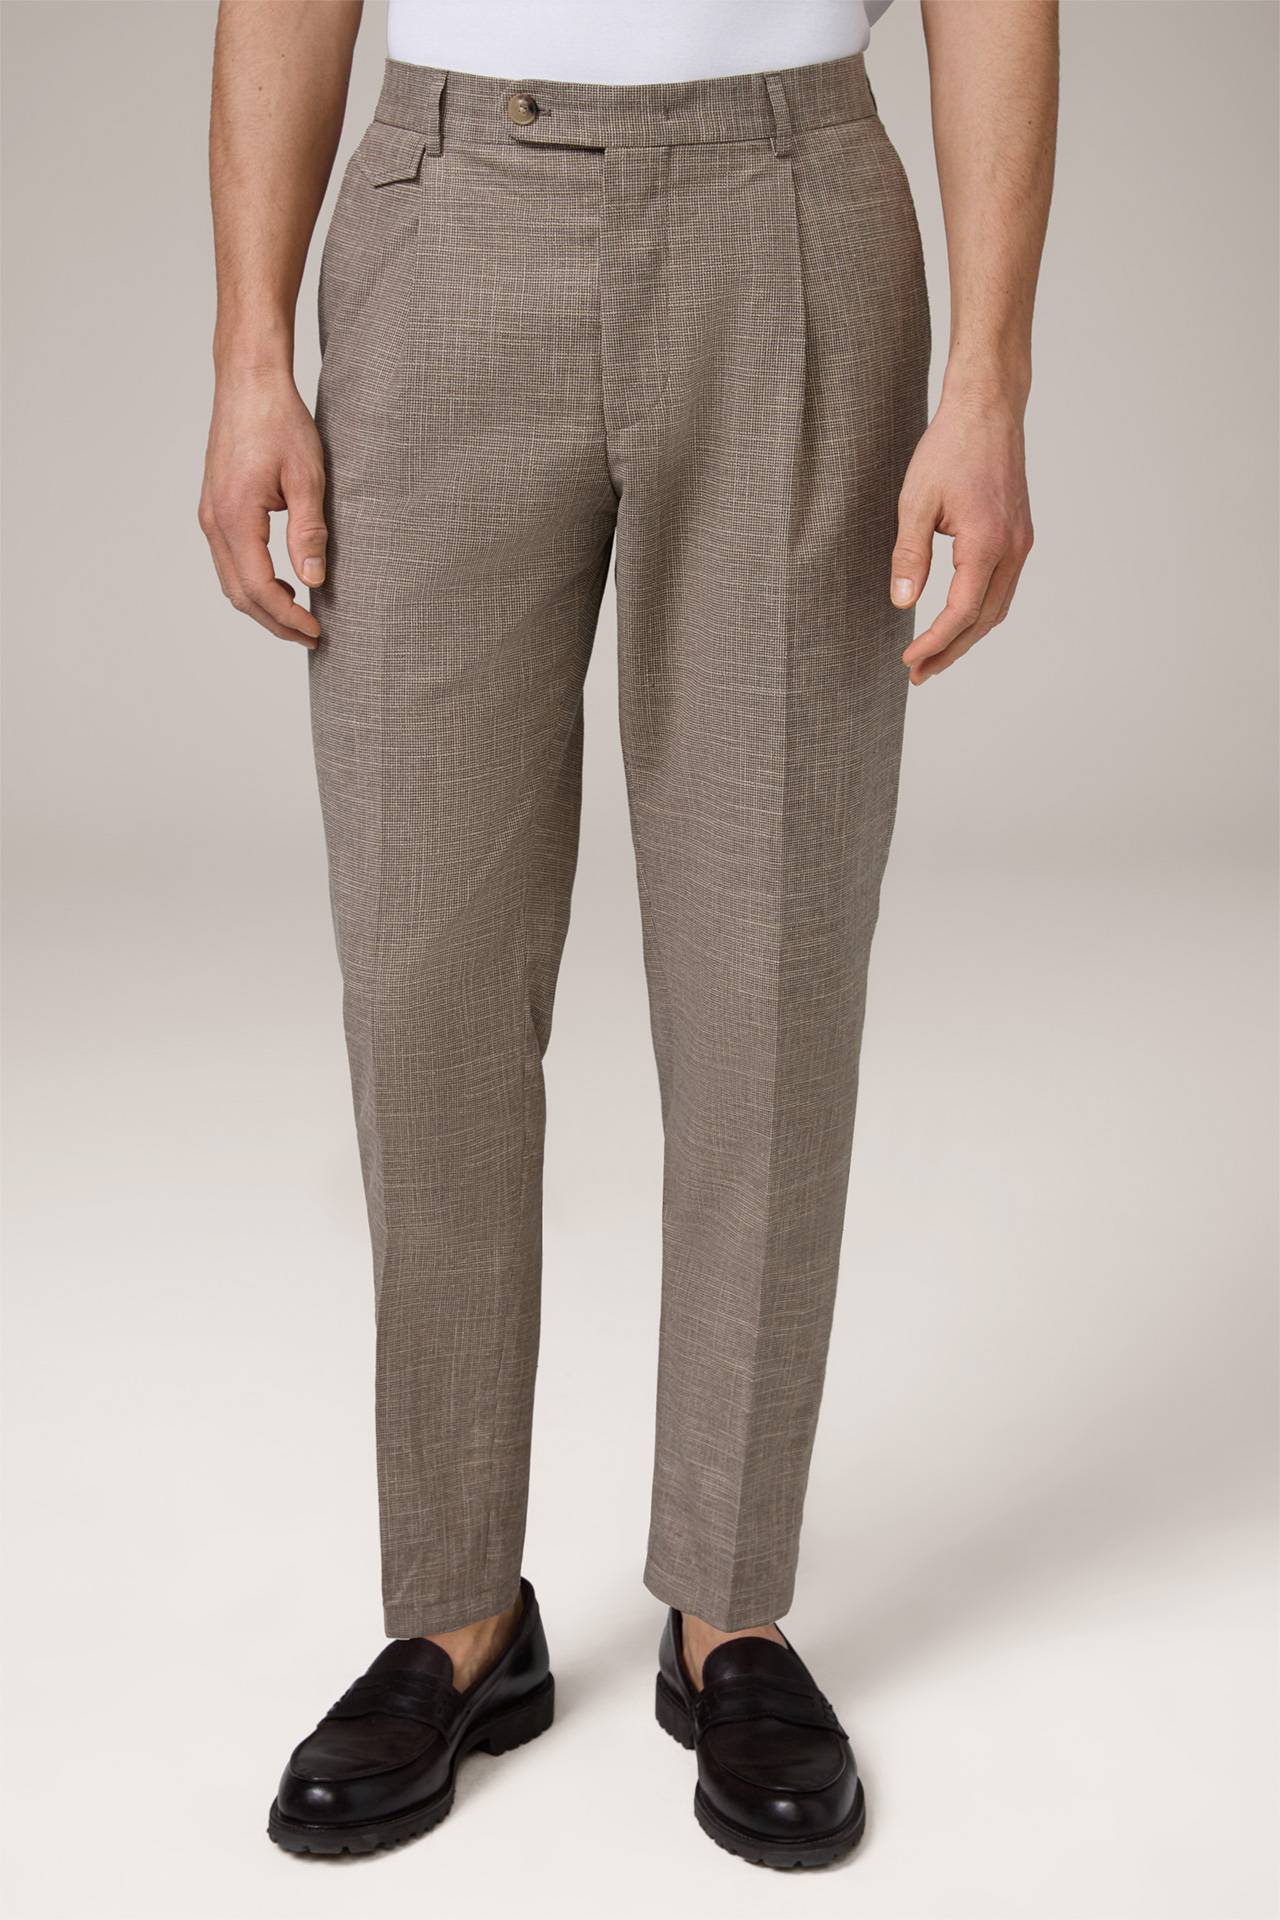 Silvi Cotton Blend Modular Trousers with Pleats in Brown and Beige Patterned